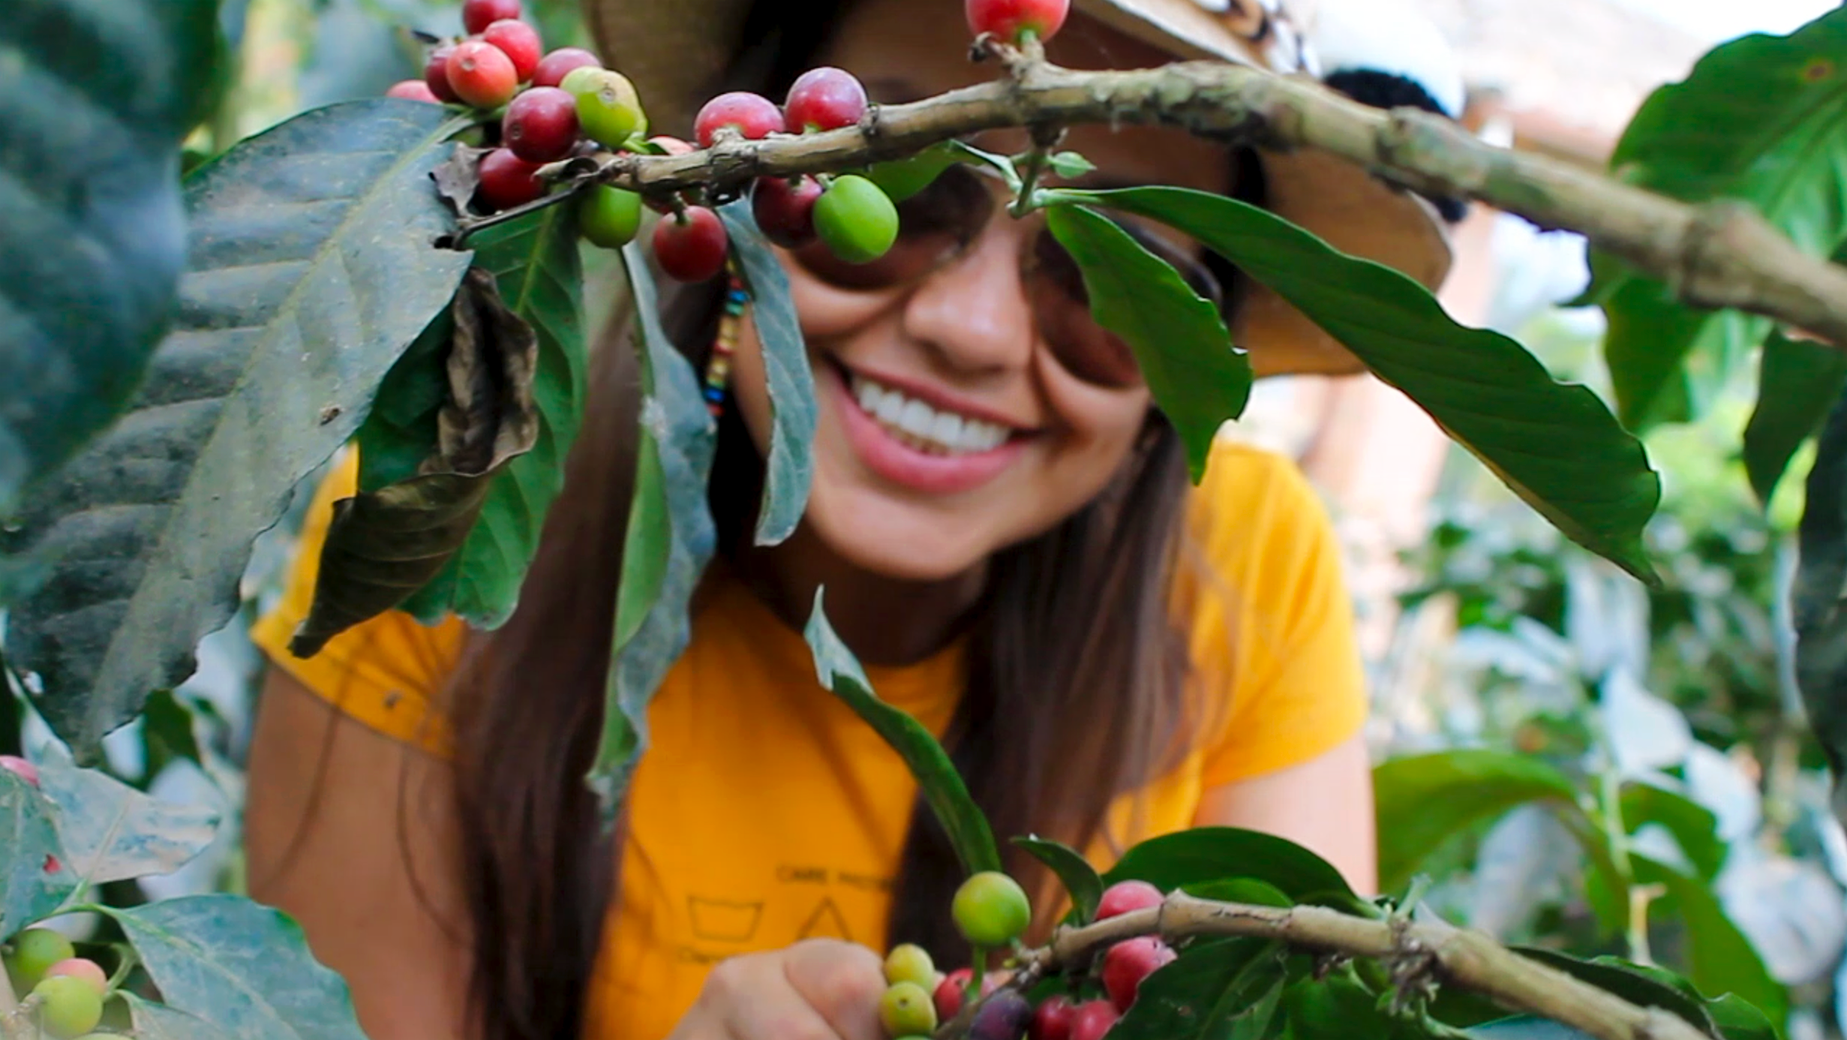 A person wearing sunglasses and a hat smiles while peeking through the branches of a coffee plant with red and green berries, showcasing one of the delightful things to do in Bogotá.